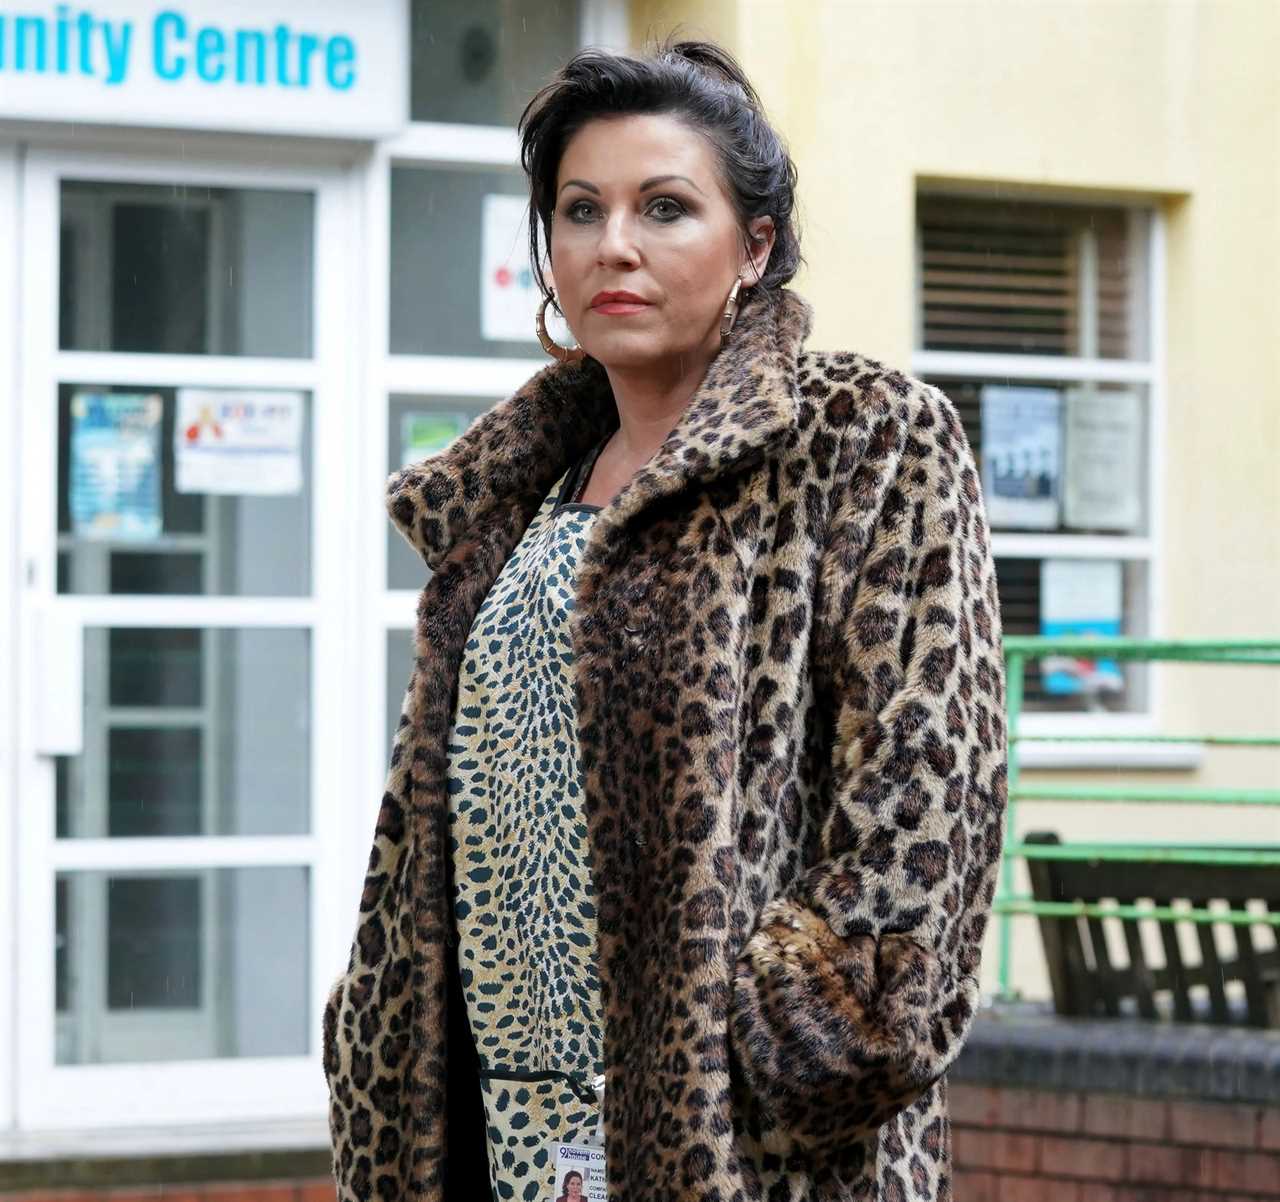 EastEnders’ Jessie Wallace, 51, looks a world away from Kat Slater with ‘cute’ short hair and glasses after makeover